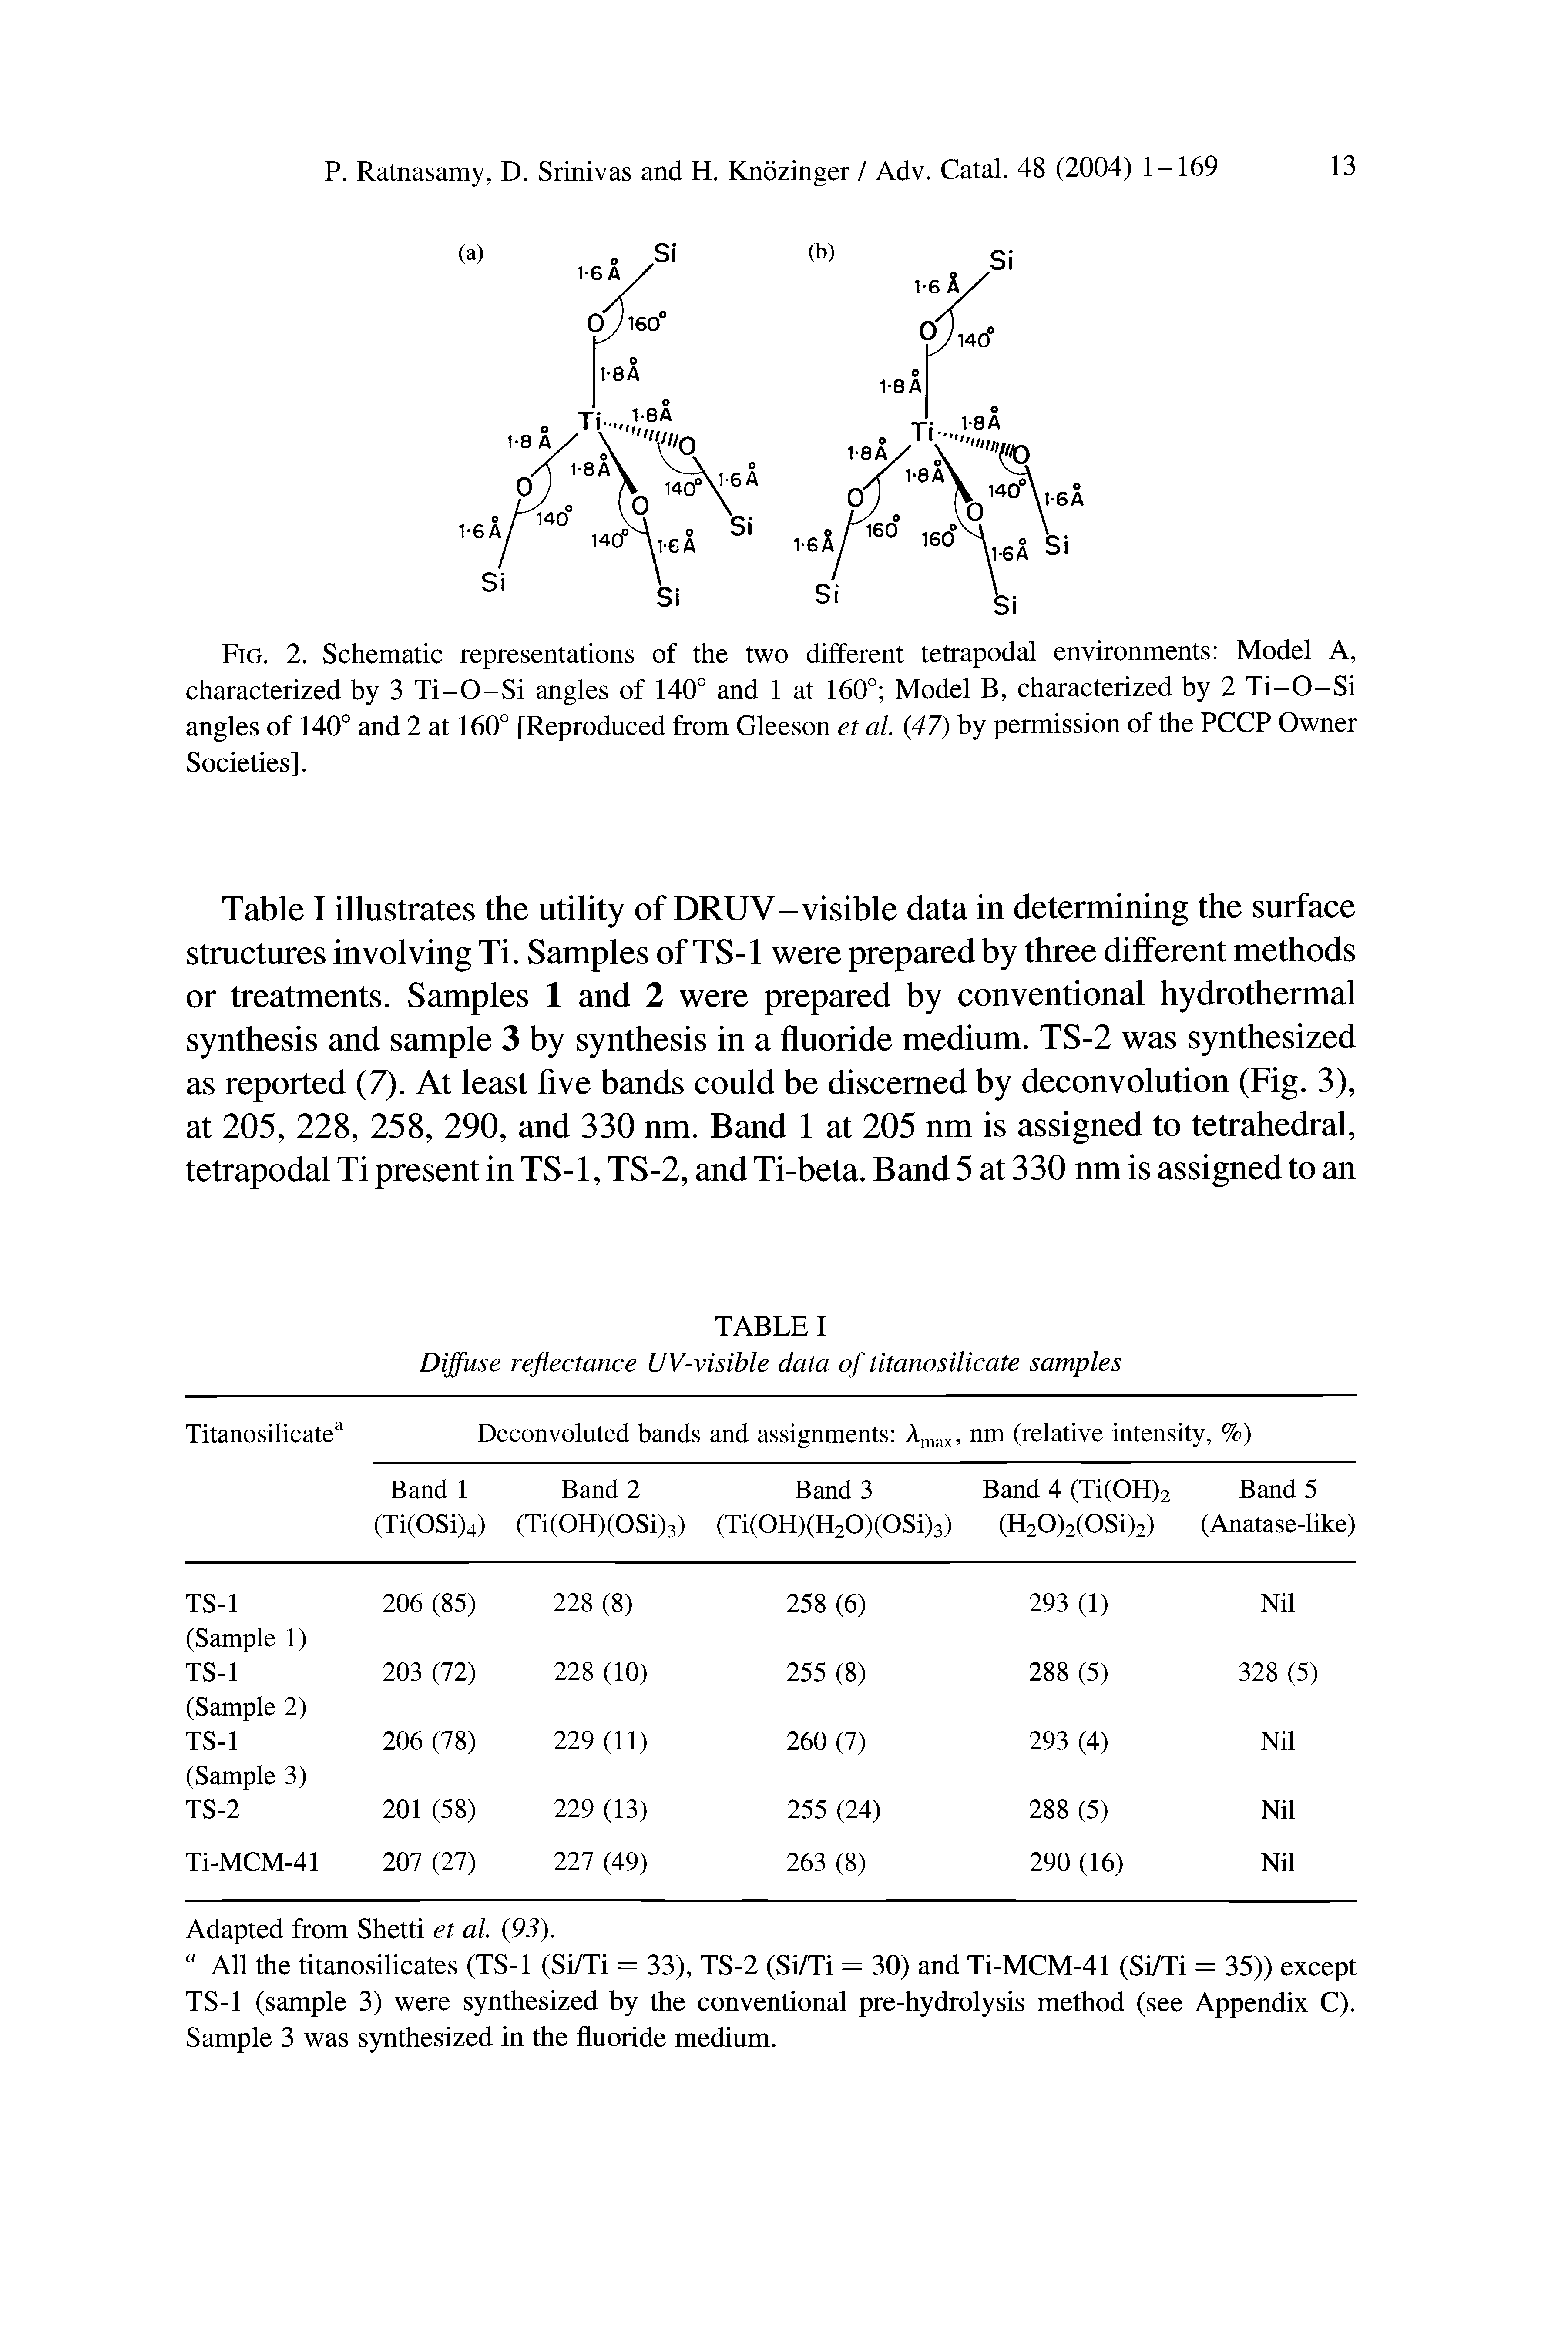 Table I illustrates the utility of DRUV-visible data in determining the surface structures involving Ti. Samples of TS-1 were prepared by three different methods or treatments. Samples 1 and 2 were prepared by conventional hydrothermal synthesis and sample 3 by synthesis in a fluoride medium. TS-2 was synthesized as reported (7). At least five bands could be discerned by deconvolution (Fig. 3), at 205, 228, 258, 290, and 330 nm. Band 1 at 205 nm is assigned to tetrahedral, tetrapodal Ti present in TS-1, TS-2, and Ti-beta. Band 5 at 330 nm is assigned to an...